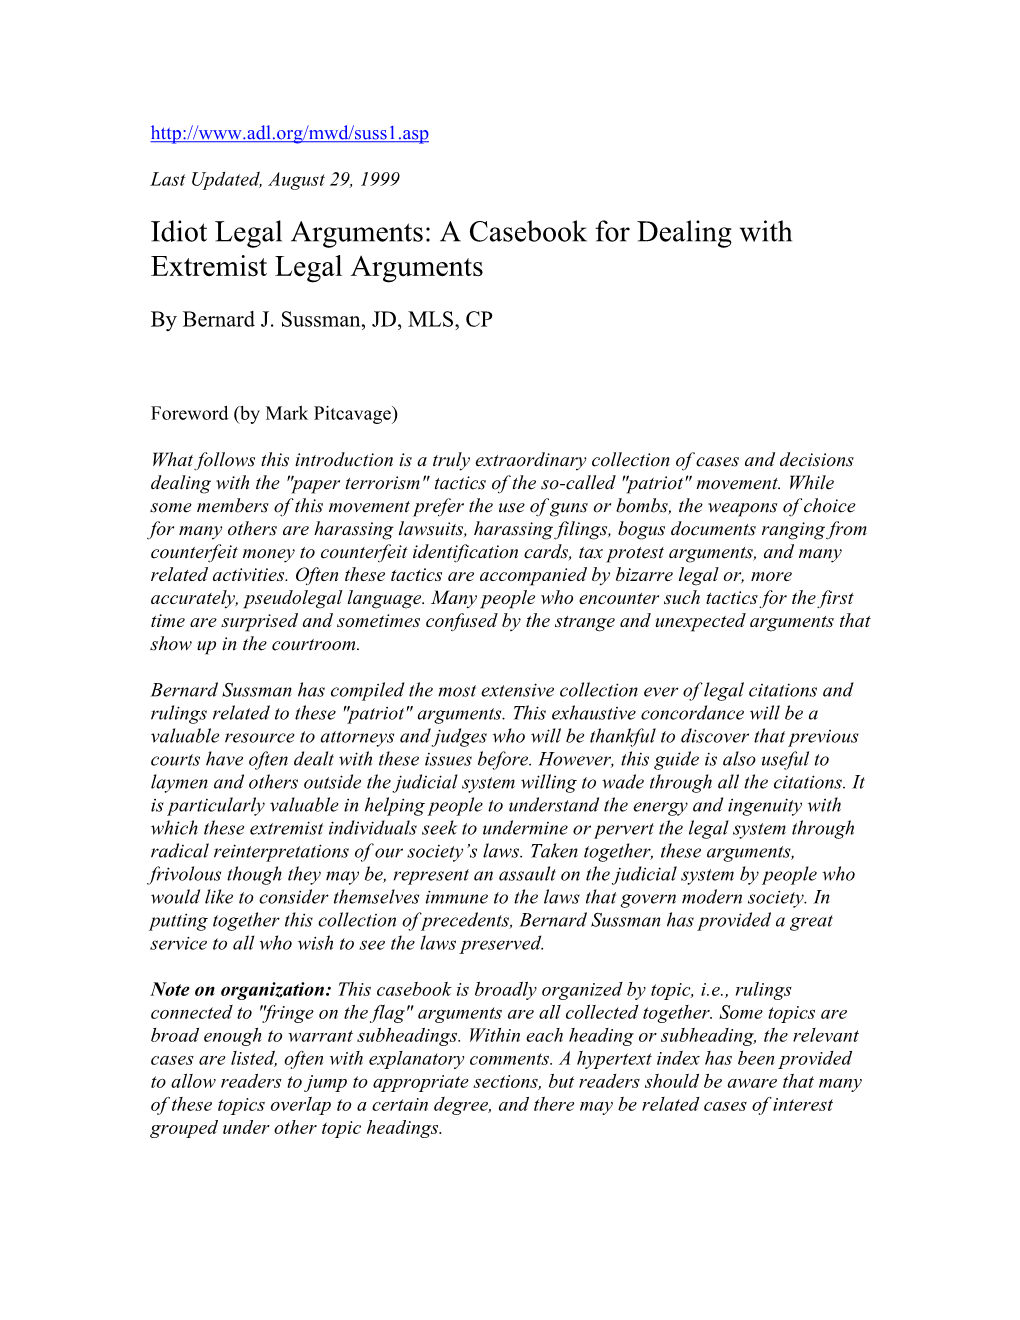 Idiot Legal Arguments: a Casebook for Dealing with Extremist Legal Arguments